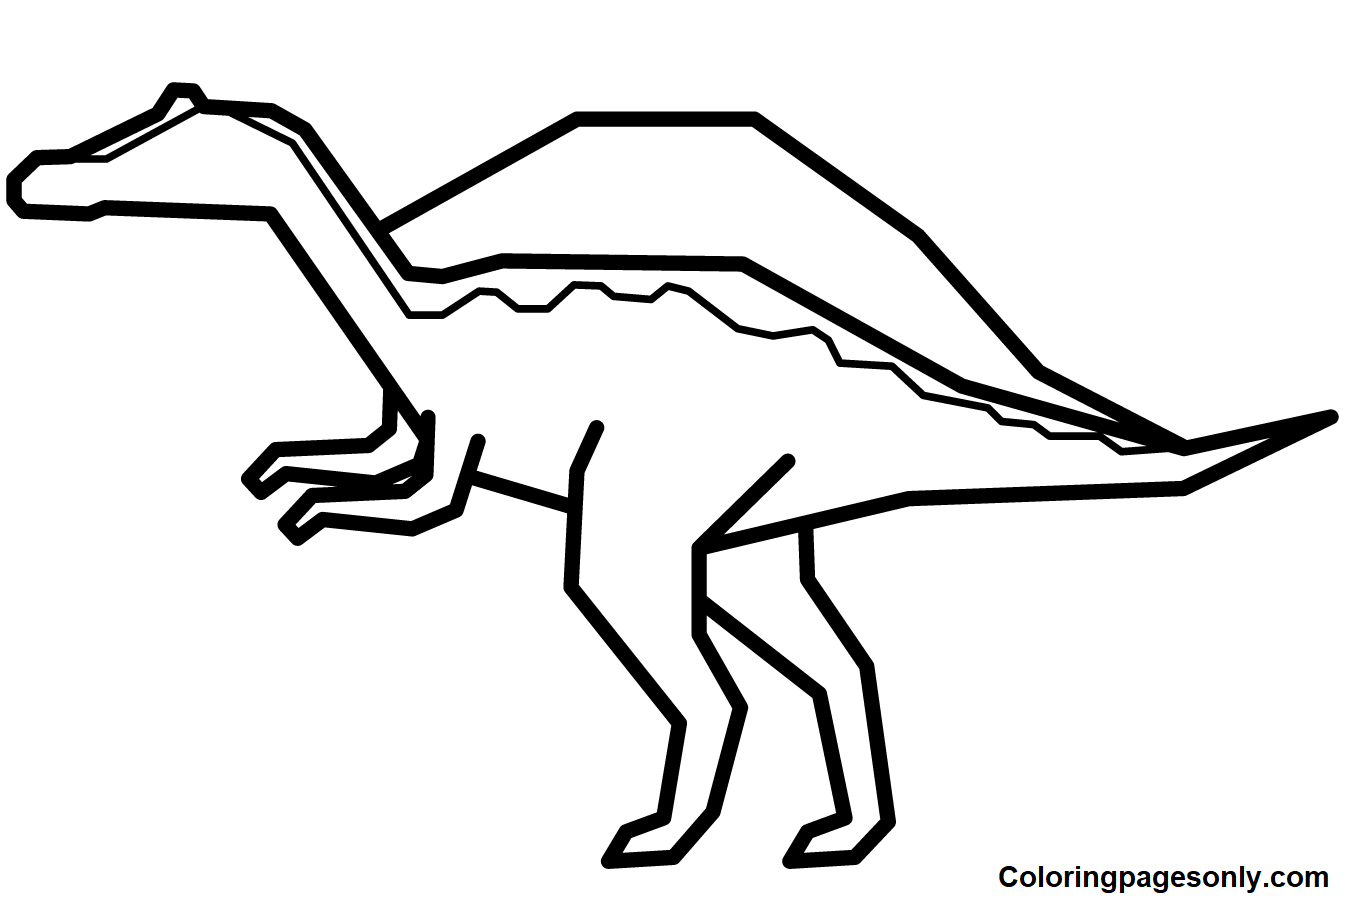 Spinosaurus Picture to Print Coloring Pages